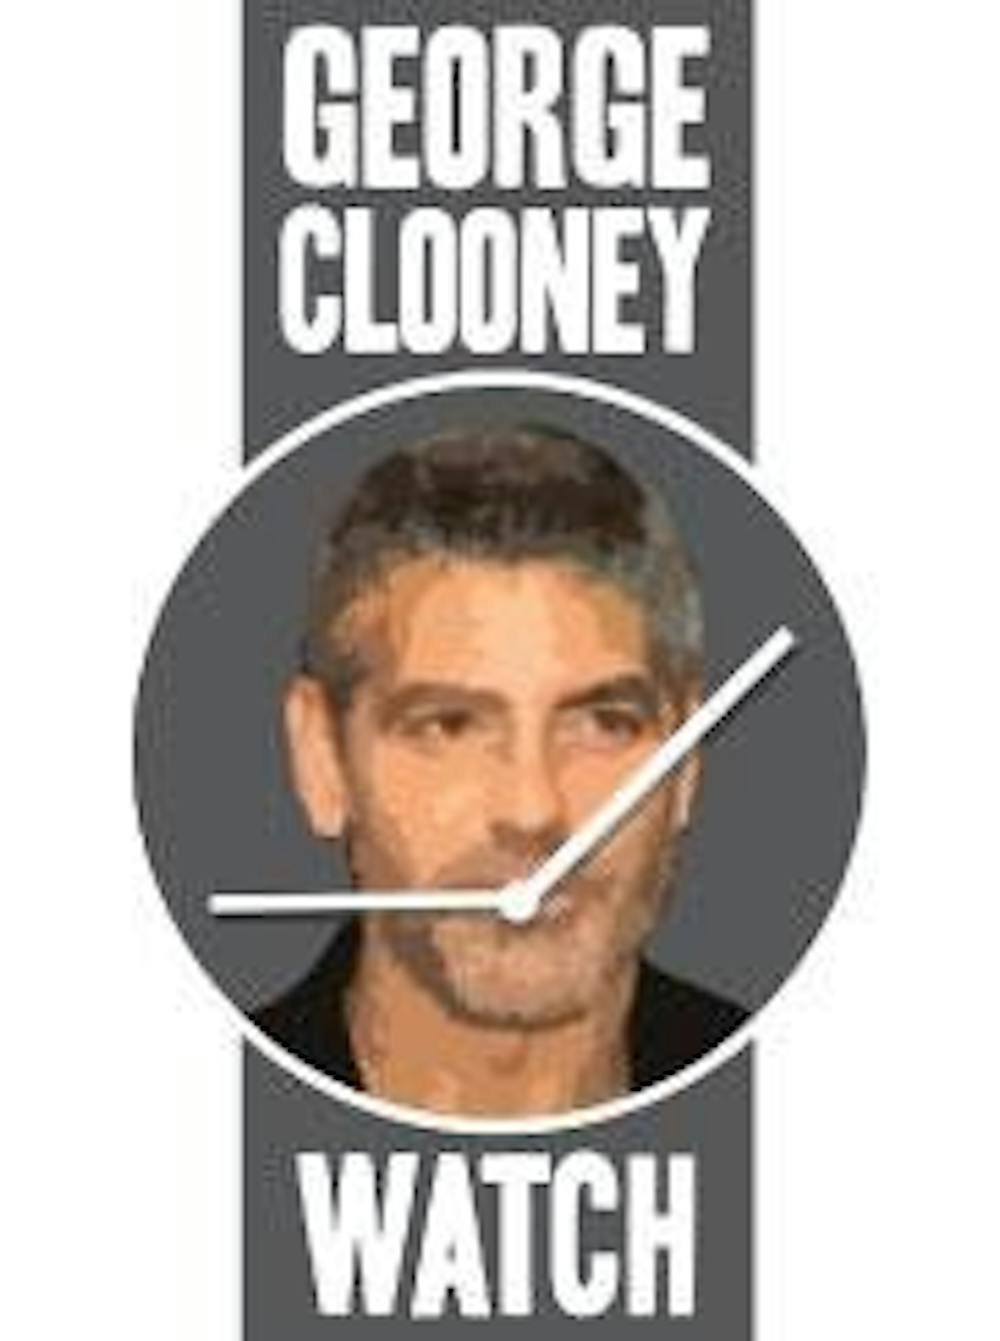 If you see George Clooney in Cincinnati or Oxford, snap a photo and send it to eic@miamistudent.net!